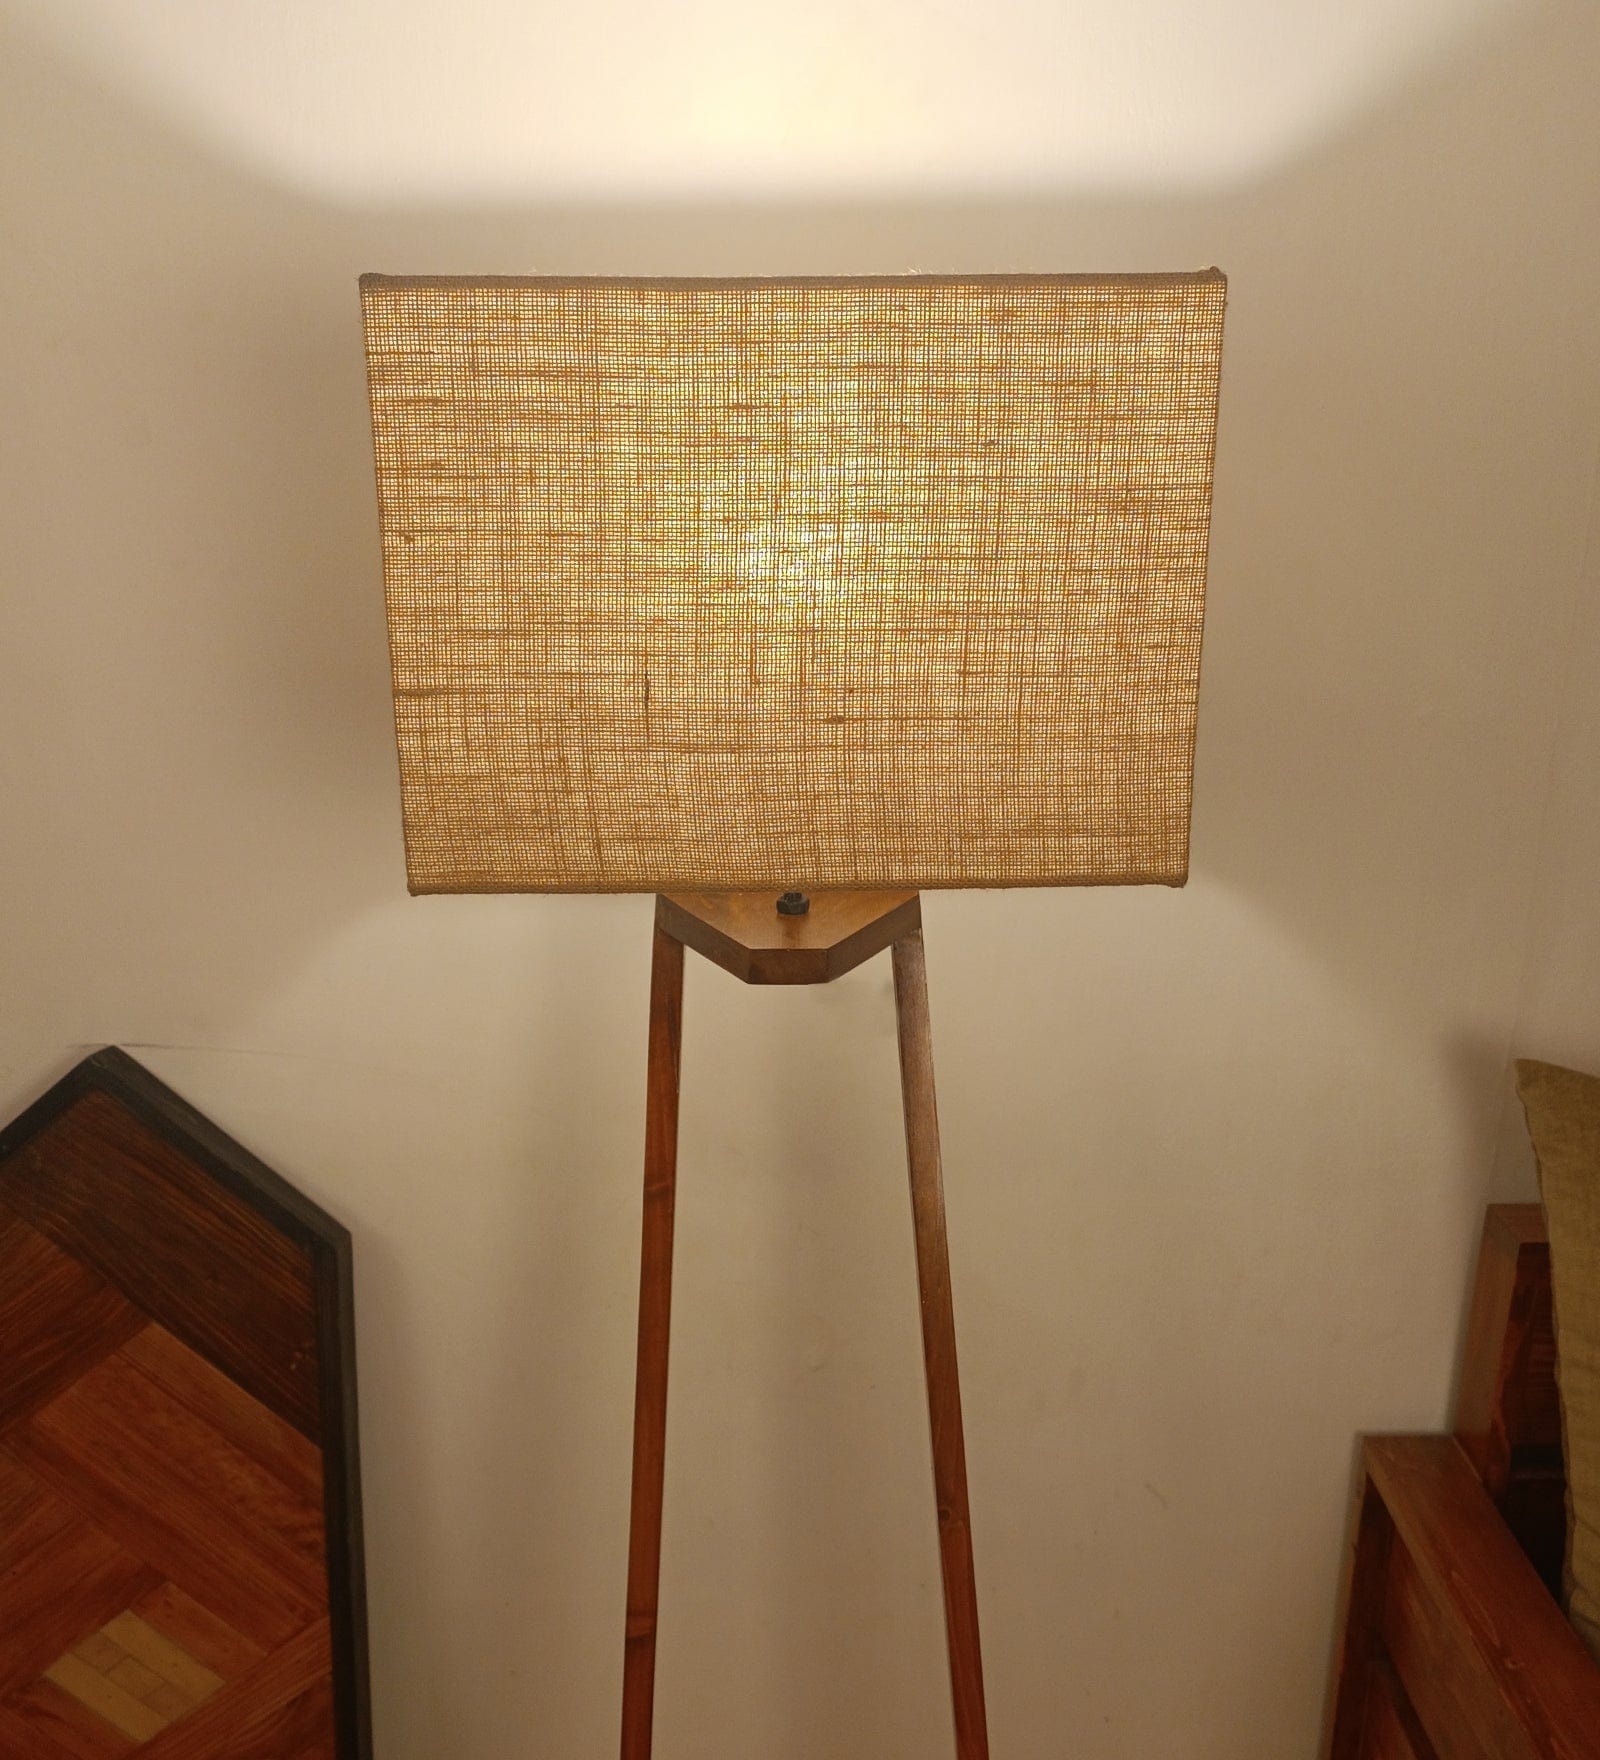 Angular Wooden Floor Lamp with Brown Base and Premium Beige Fabric Lampshade (BULB NOT INCLUDED)